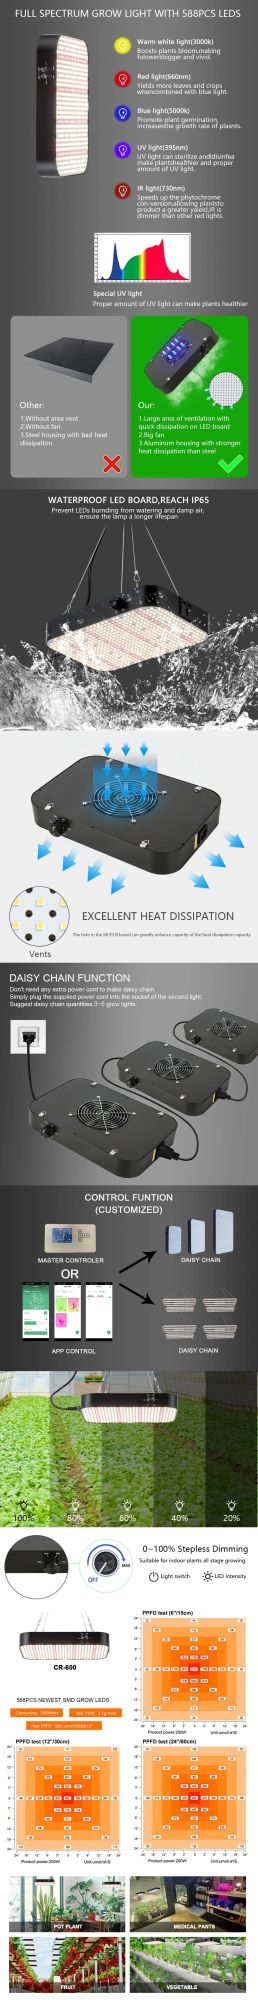 Highest Yielding Full Spectrum Plant Growing Lamp for All Application Scenari, High Power, Suitable for Greenhouse, Hydroponic, Commercial Indoor Plant Light